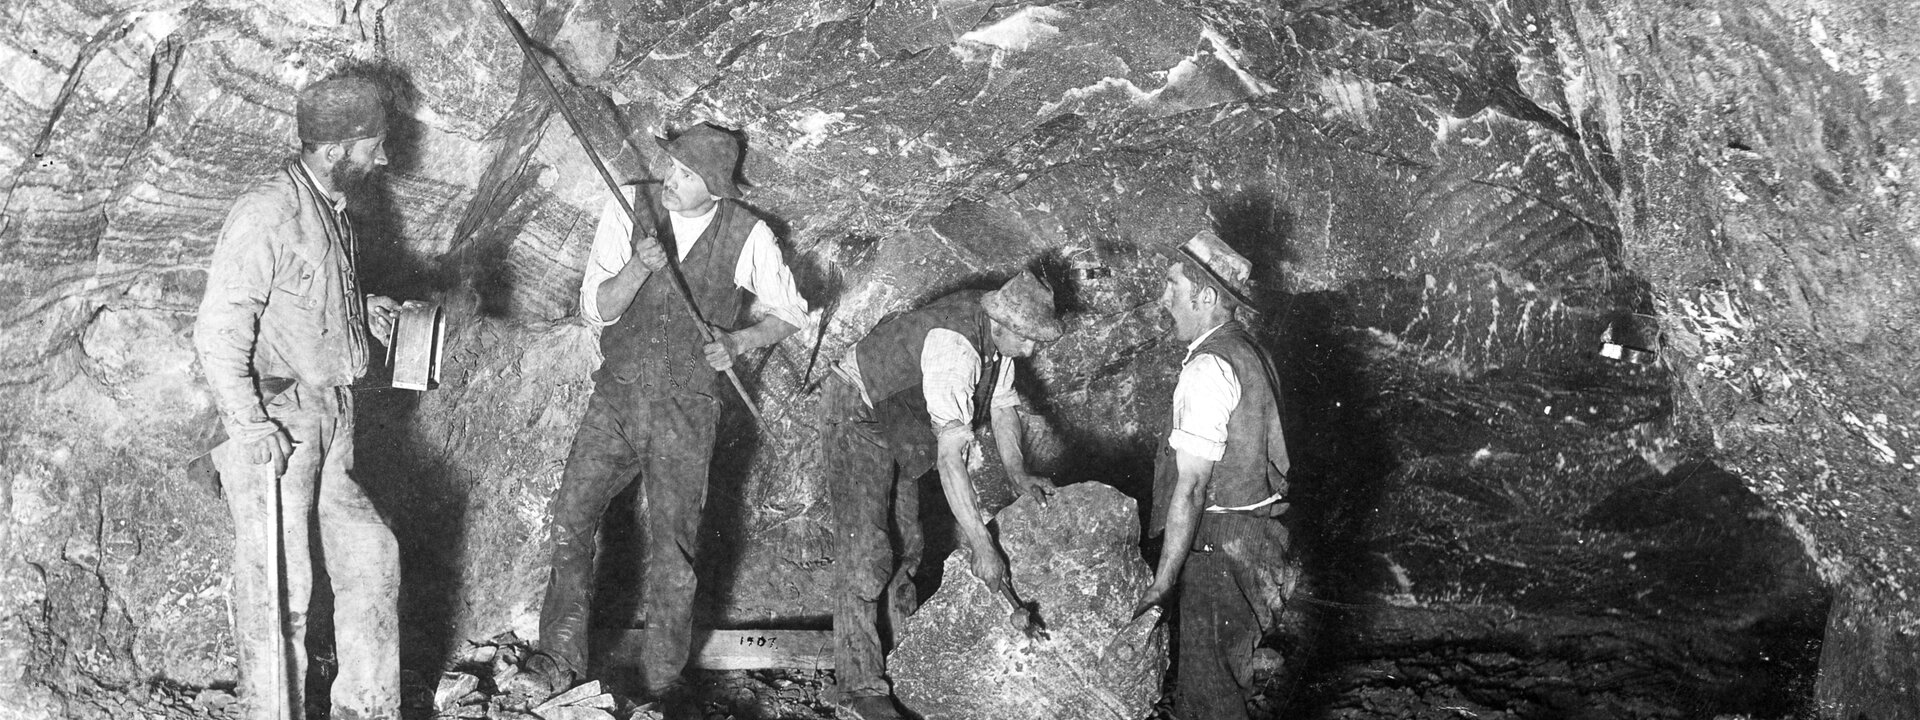 Visitors mining rock salt back in the day 